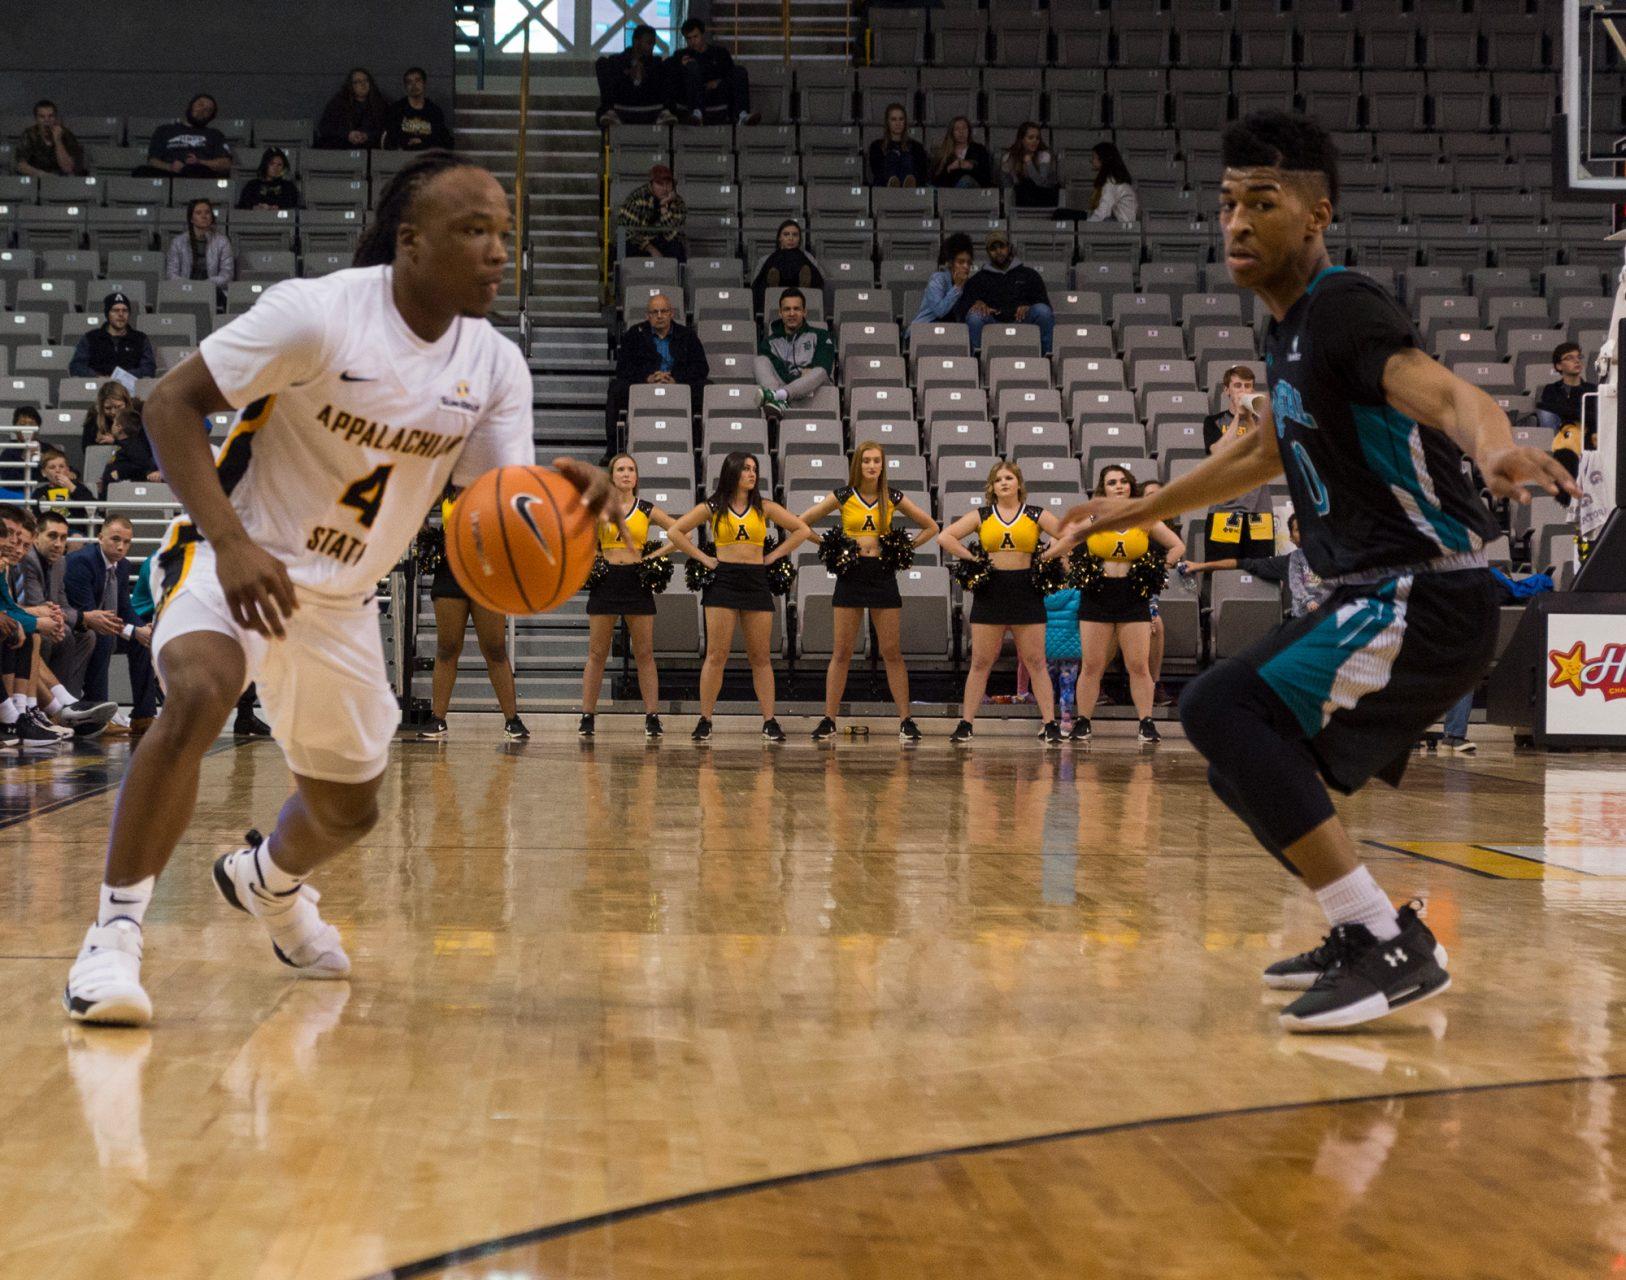 Sophomore guard OShowen Williams checks with teammates before passing the ball during the game against Coastal Carolina on Saturday, March 3rd. 